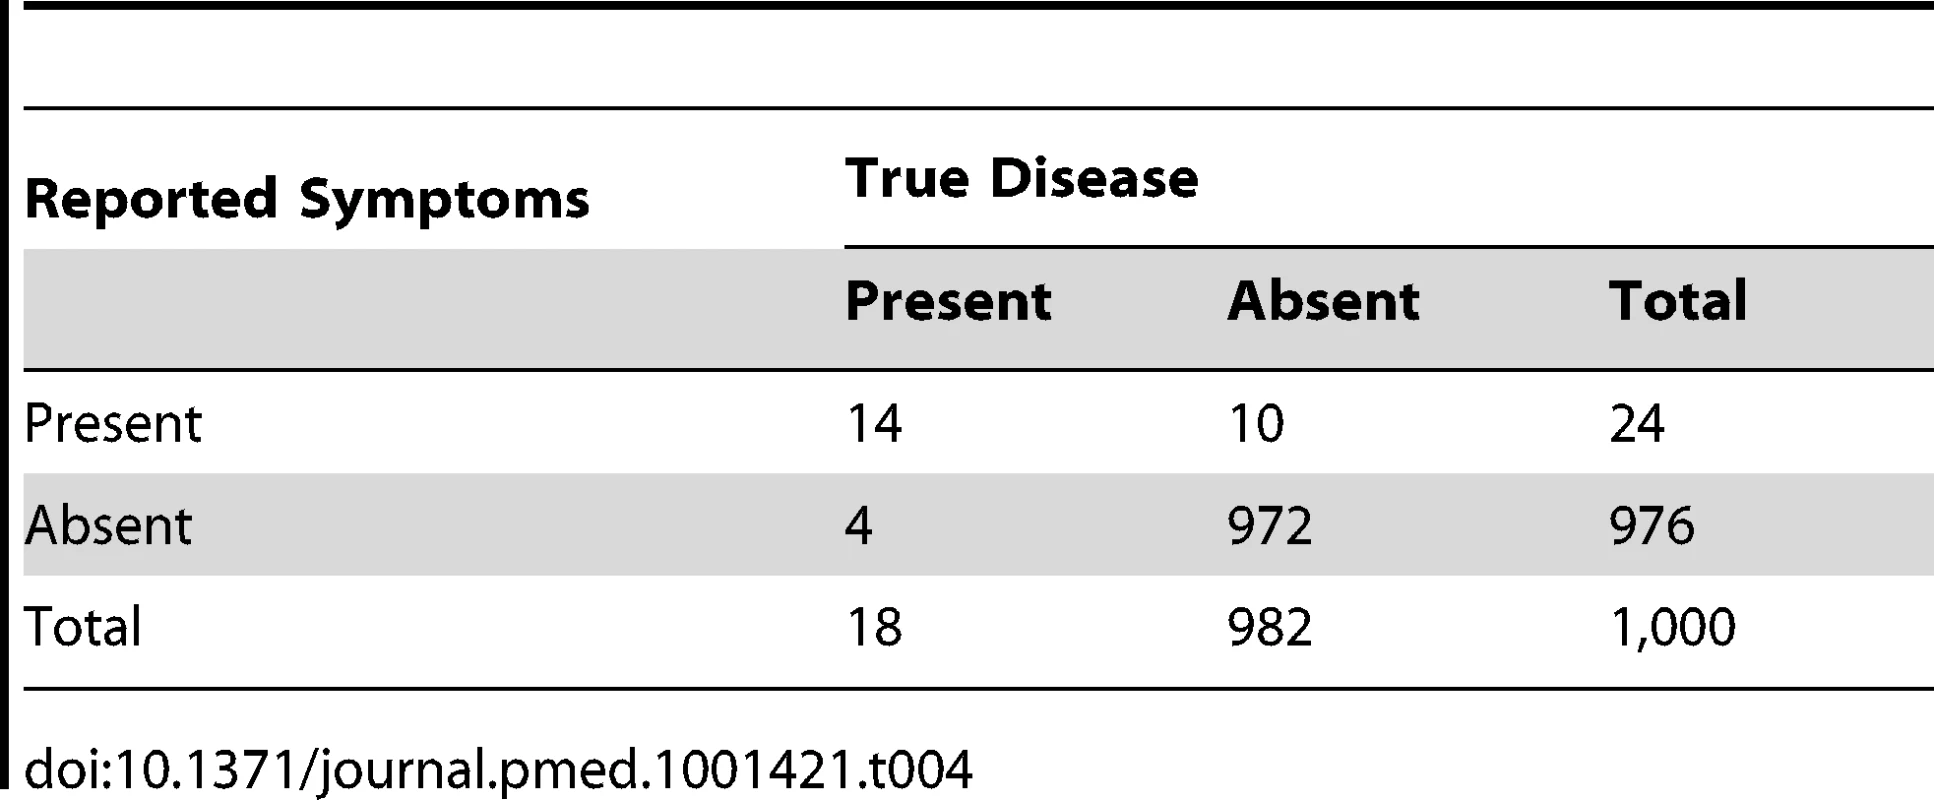 Distribution of cases of “true pneumonia” according to caregiver report of “suspected pneumonia” (test) and true disease status when test sensitivity is 80% and specificity is 99%.